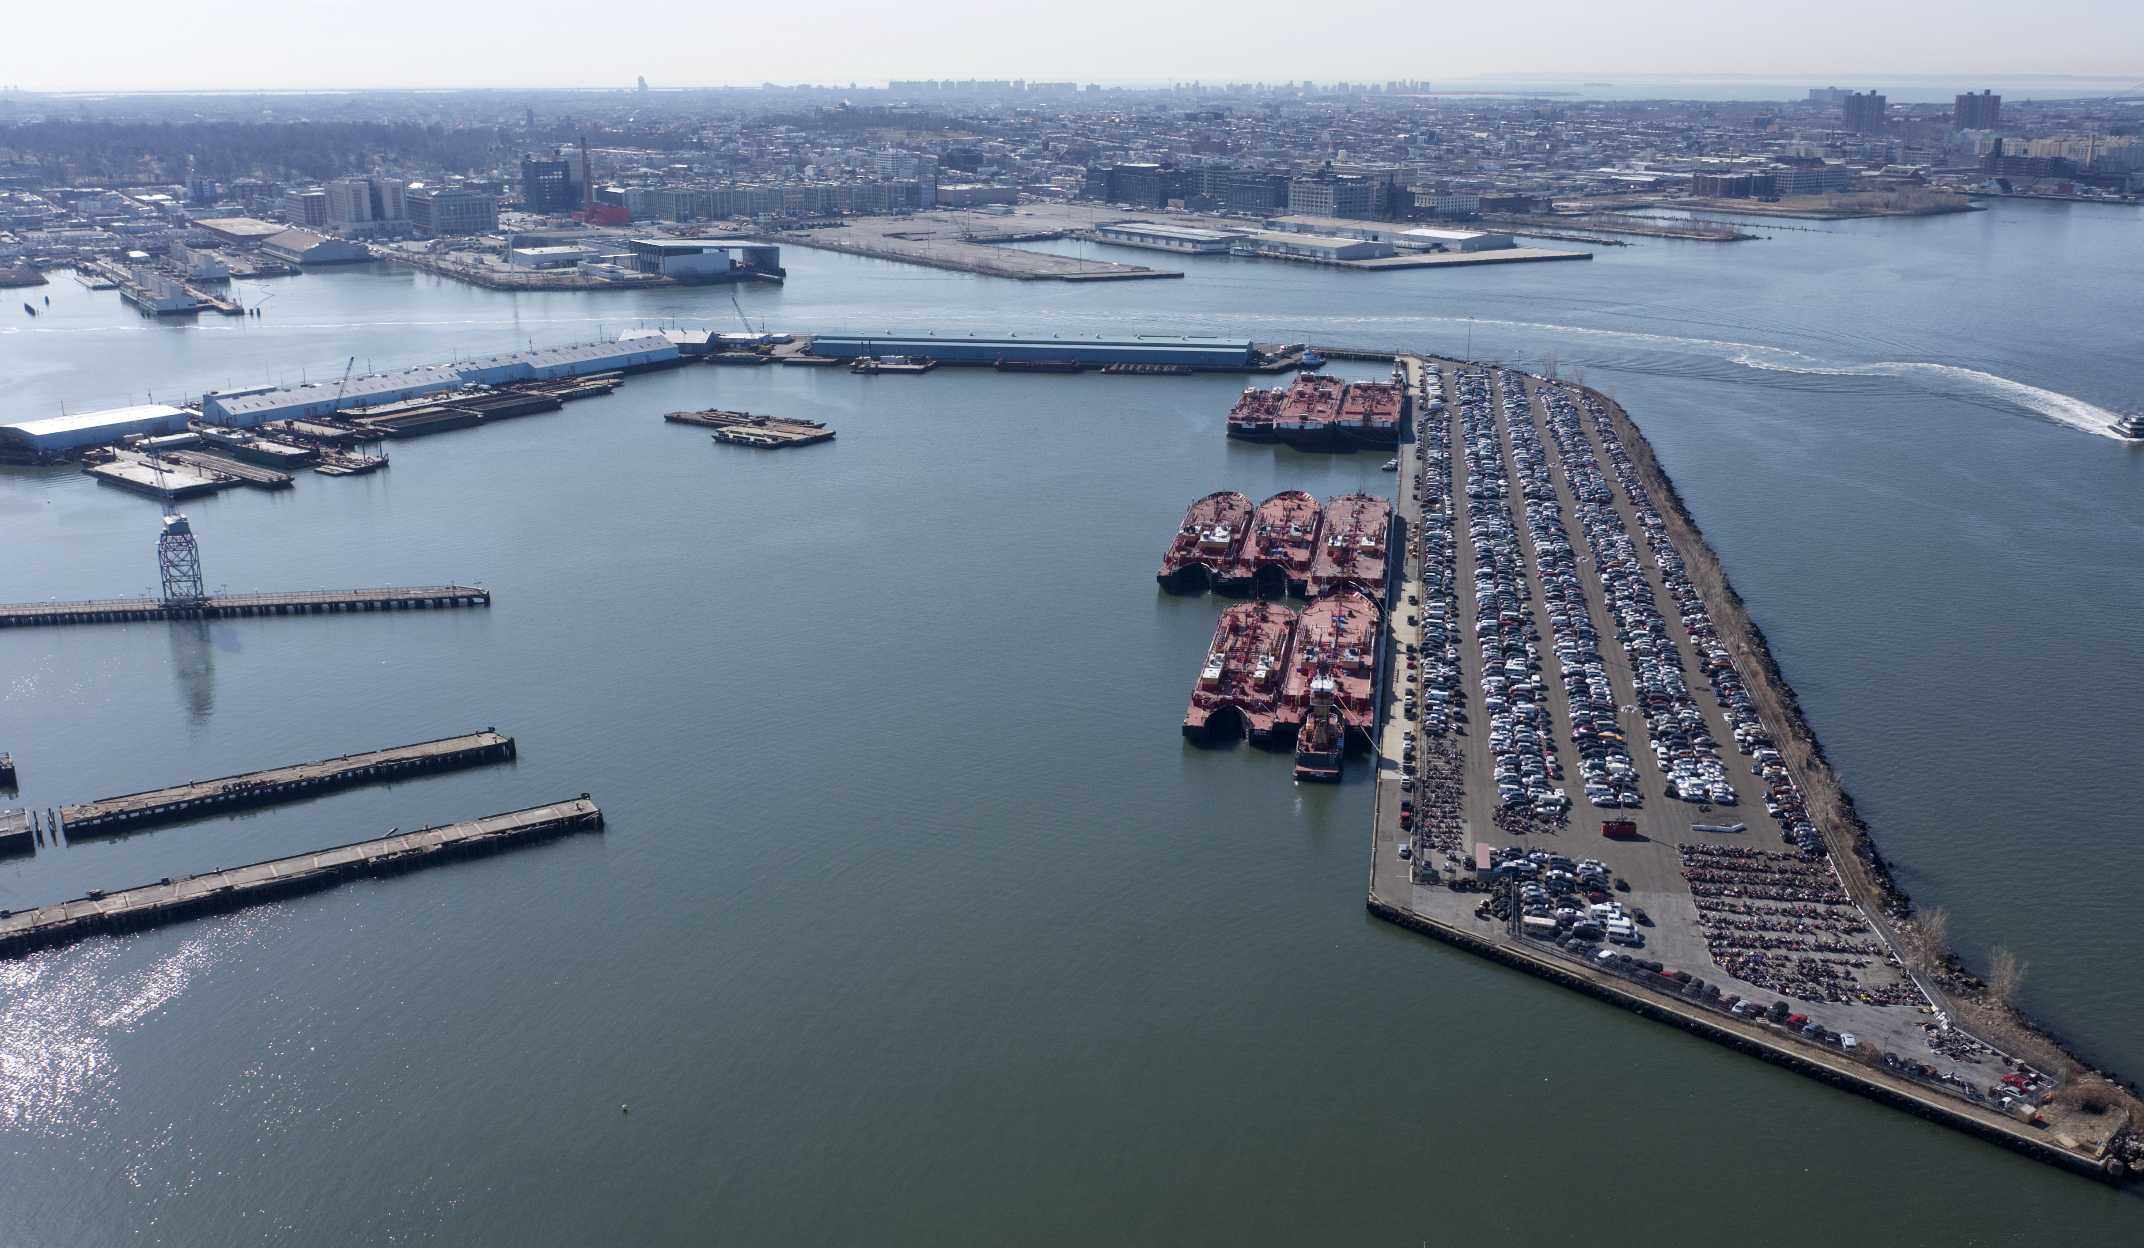 A modern new port is opening on the Brooklyn coastline